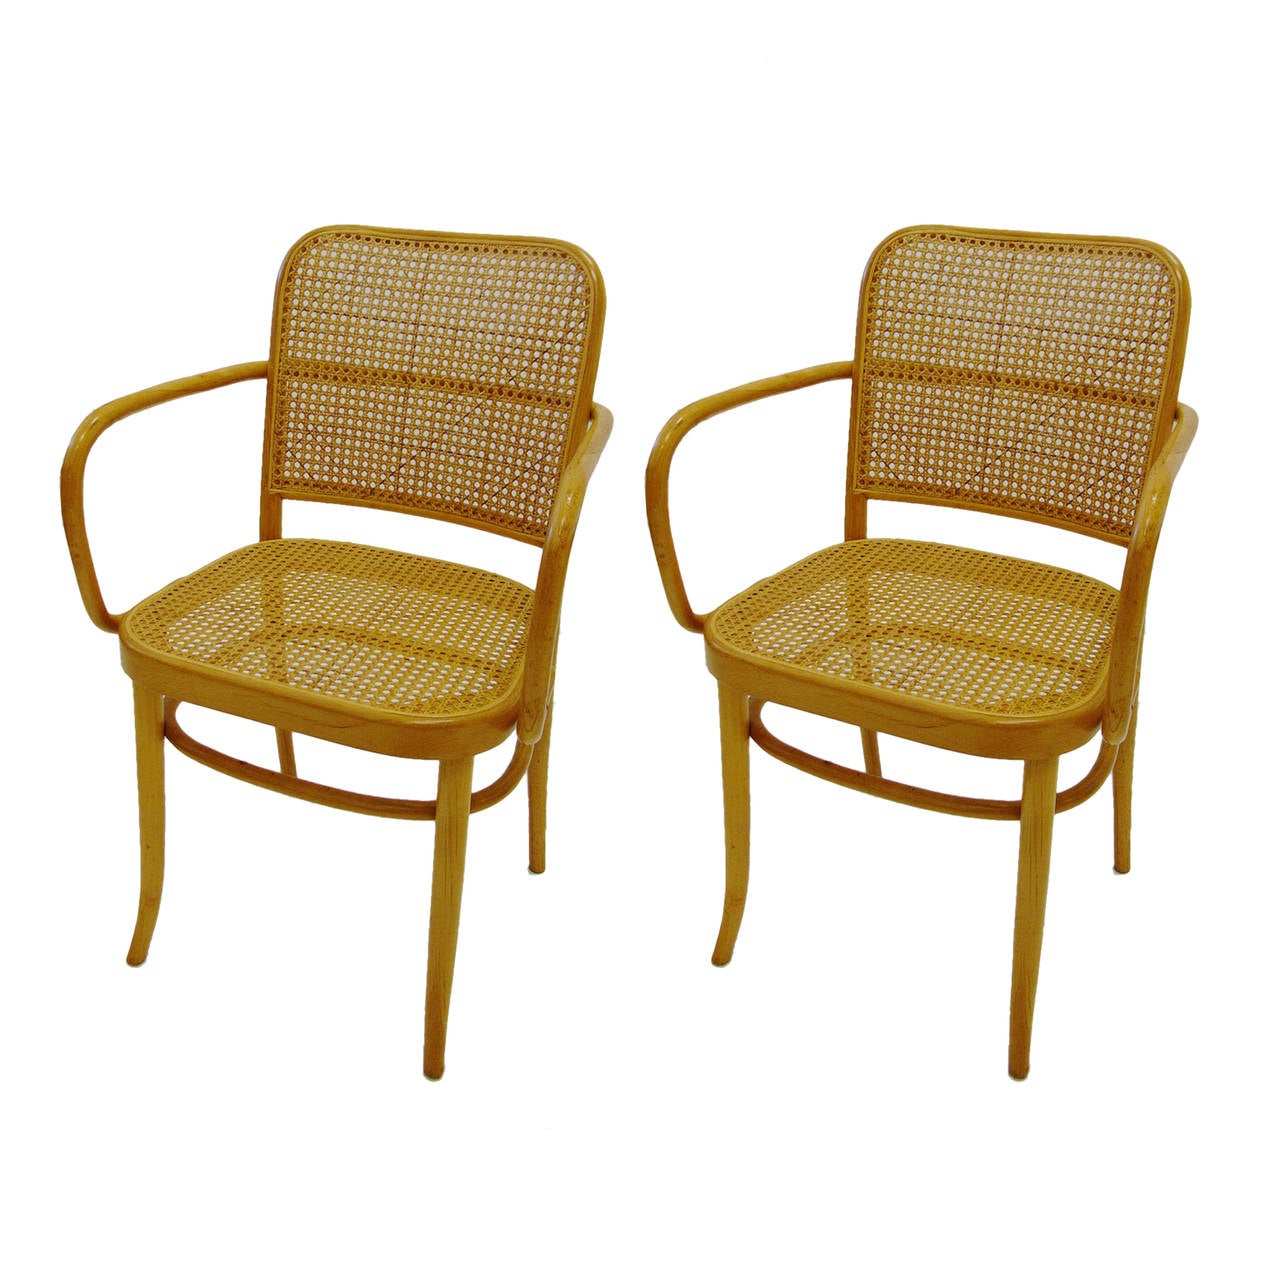 A very nice pair of Josef Hoffman and Josef Frank ''Prague'' chairs from the 1960's. Although the original chair was designed in 1925, it still remains a current design. Made in Czech Republic and imported by Stendig.